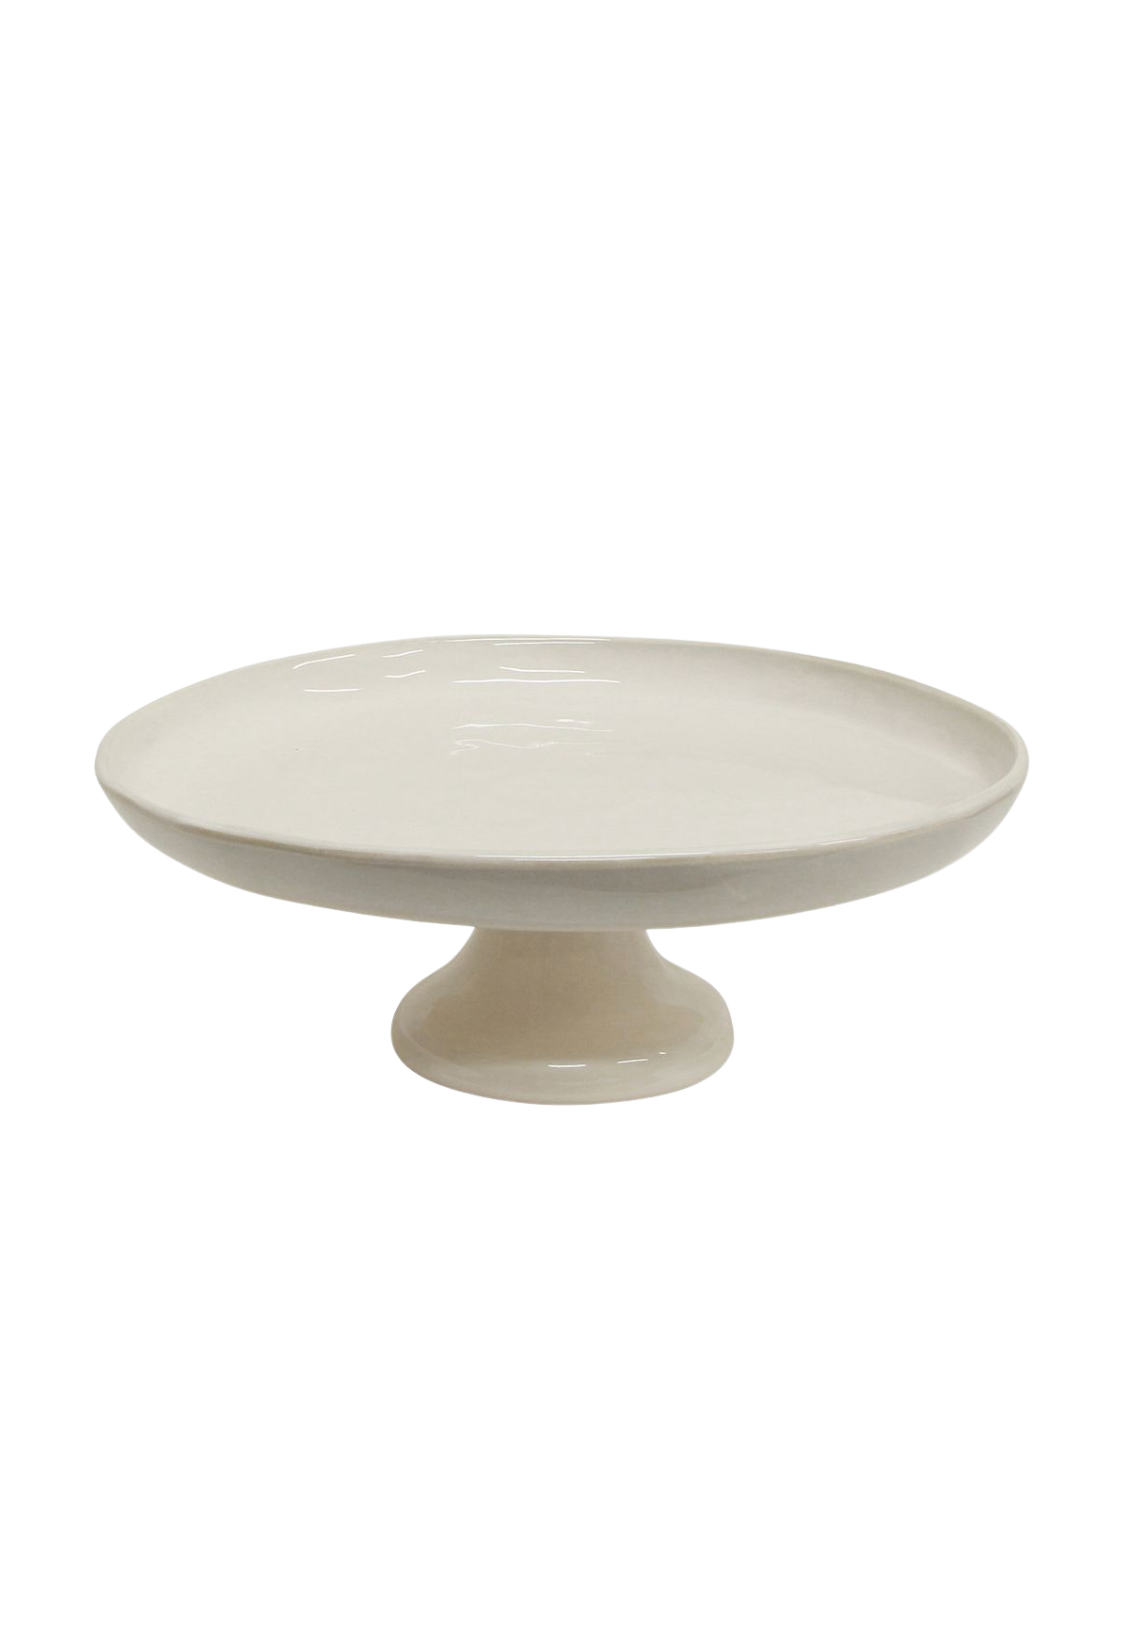 FRENCH COUNTRY FRANCO RUSTIC WHITE CAKE STAND - THE VOGUE STORE